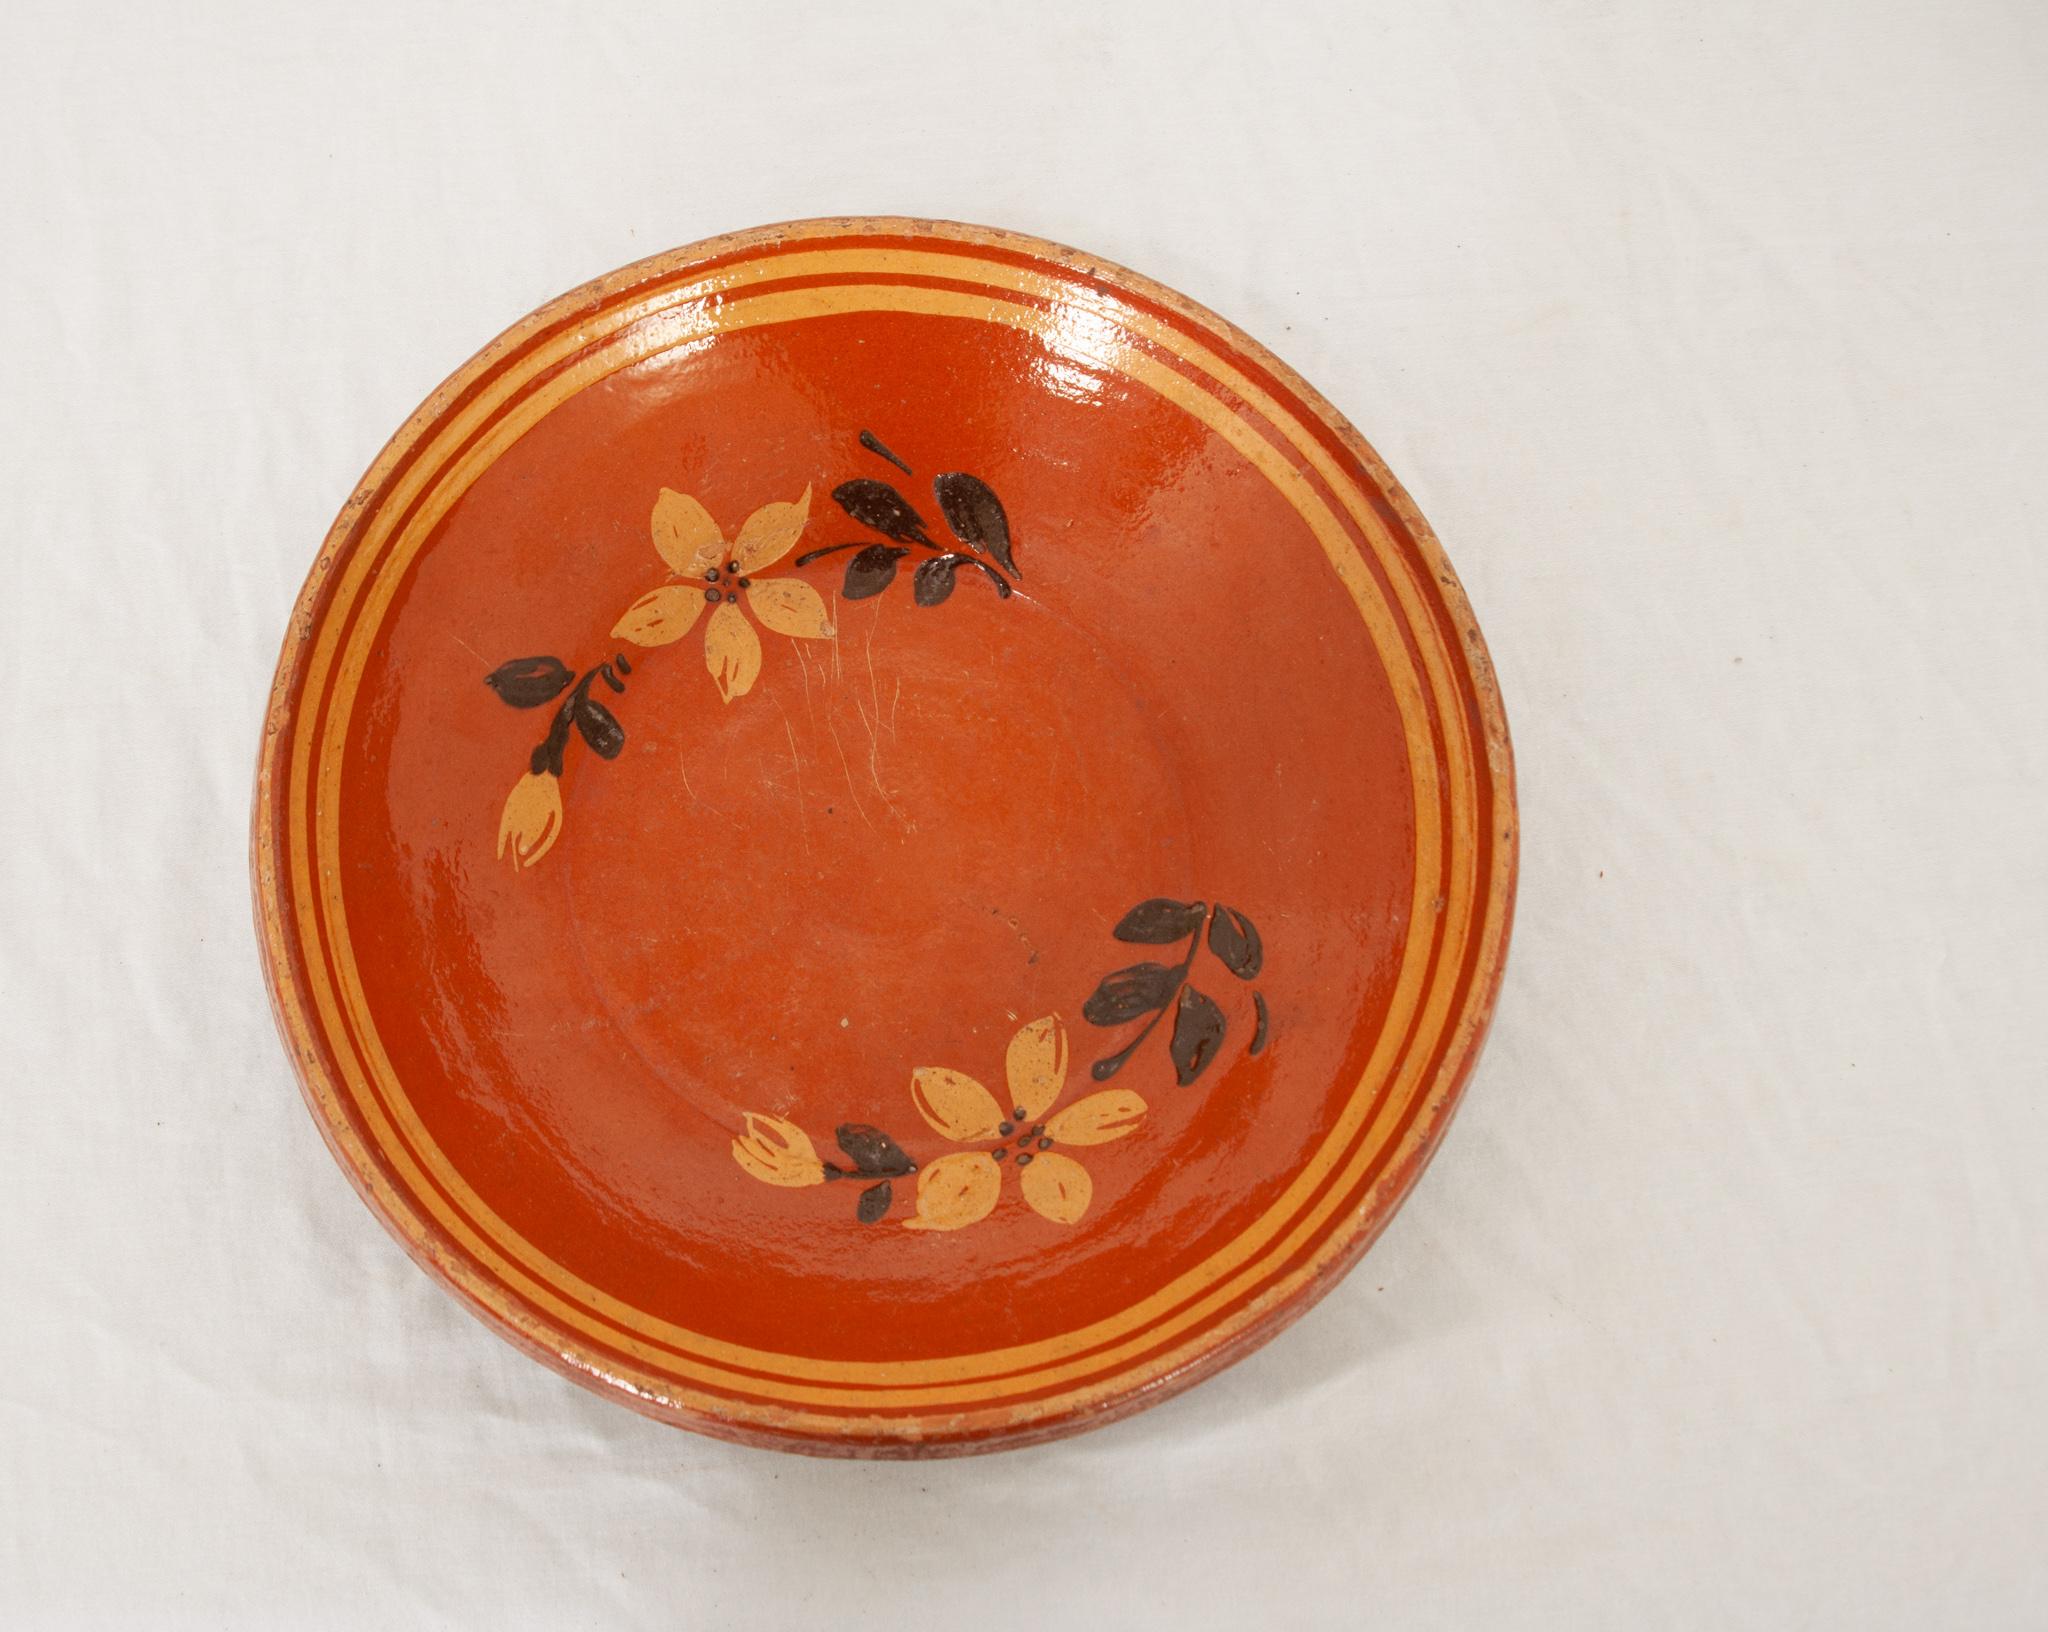 A fetching French 19th century pottery bowl of vibrant color with floral designs. This bowl has been glazed a lively warm orange with a maize yellow trim on the rim and incorporated into the delicate flowers painted in the interior. This is a lovely